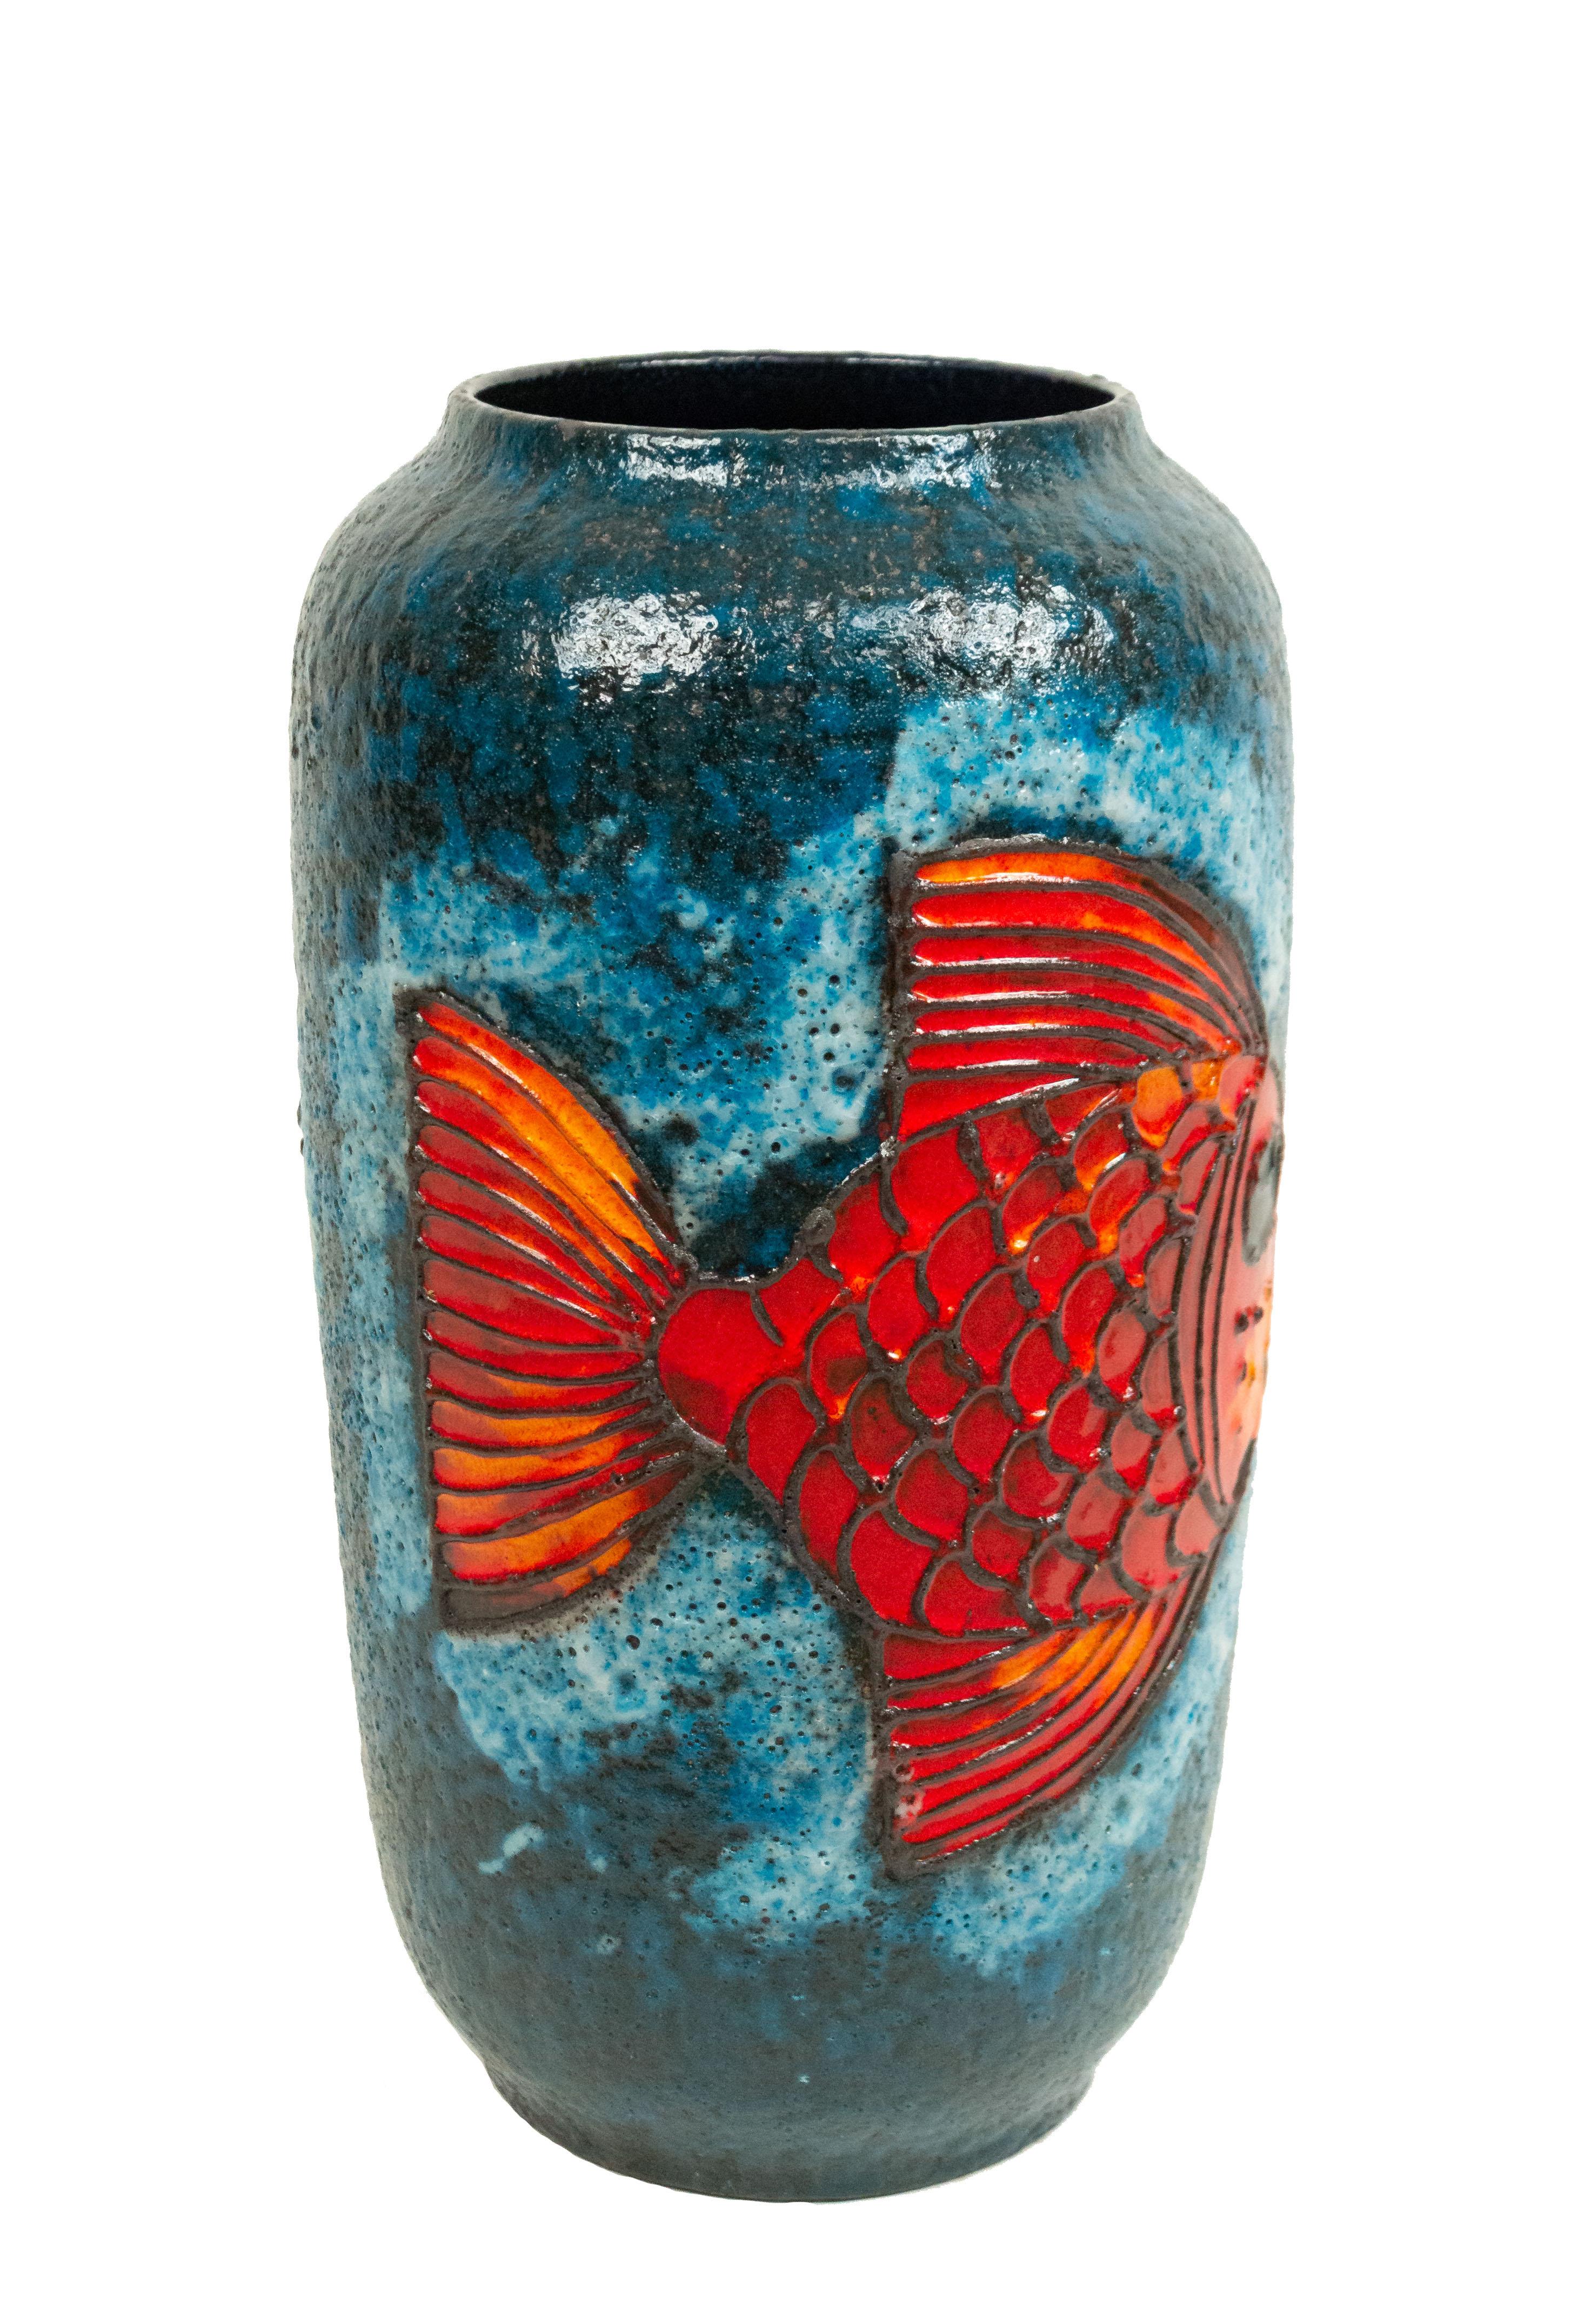 Post-War West Germany tall cylindrical dark blue vase with large orange fish.